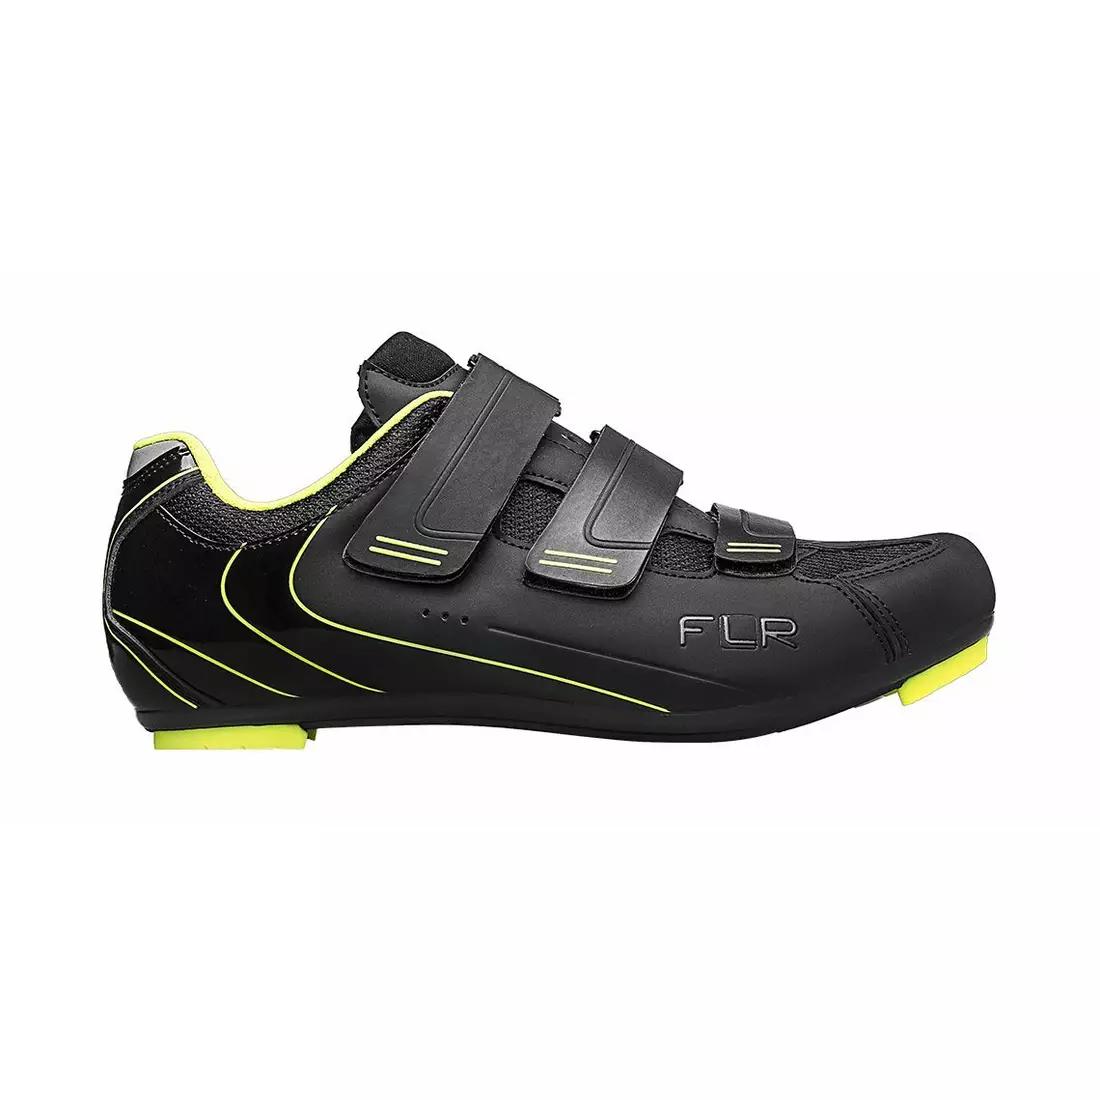 FLR F-35 bicycle shoes Black-fluor